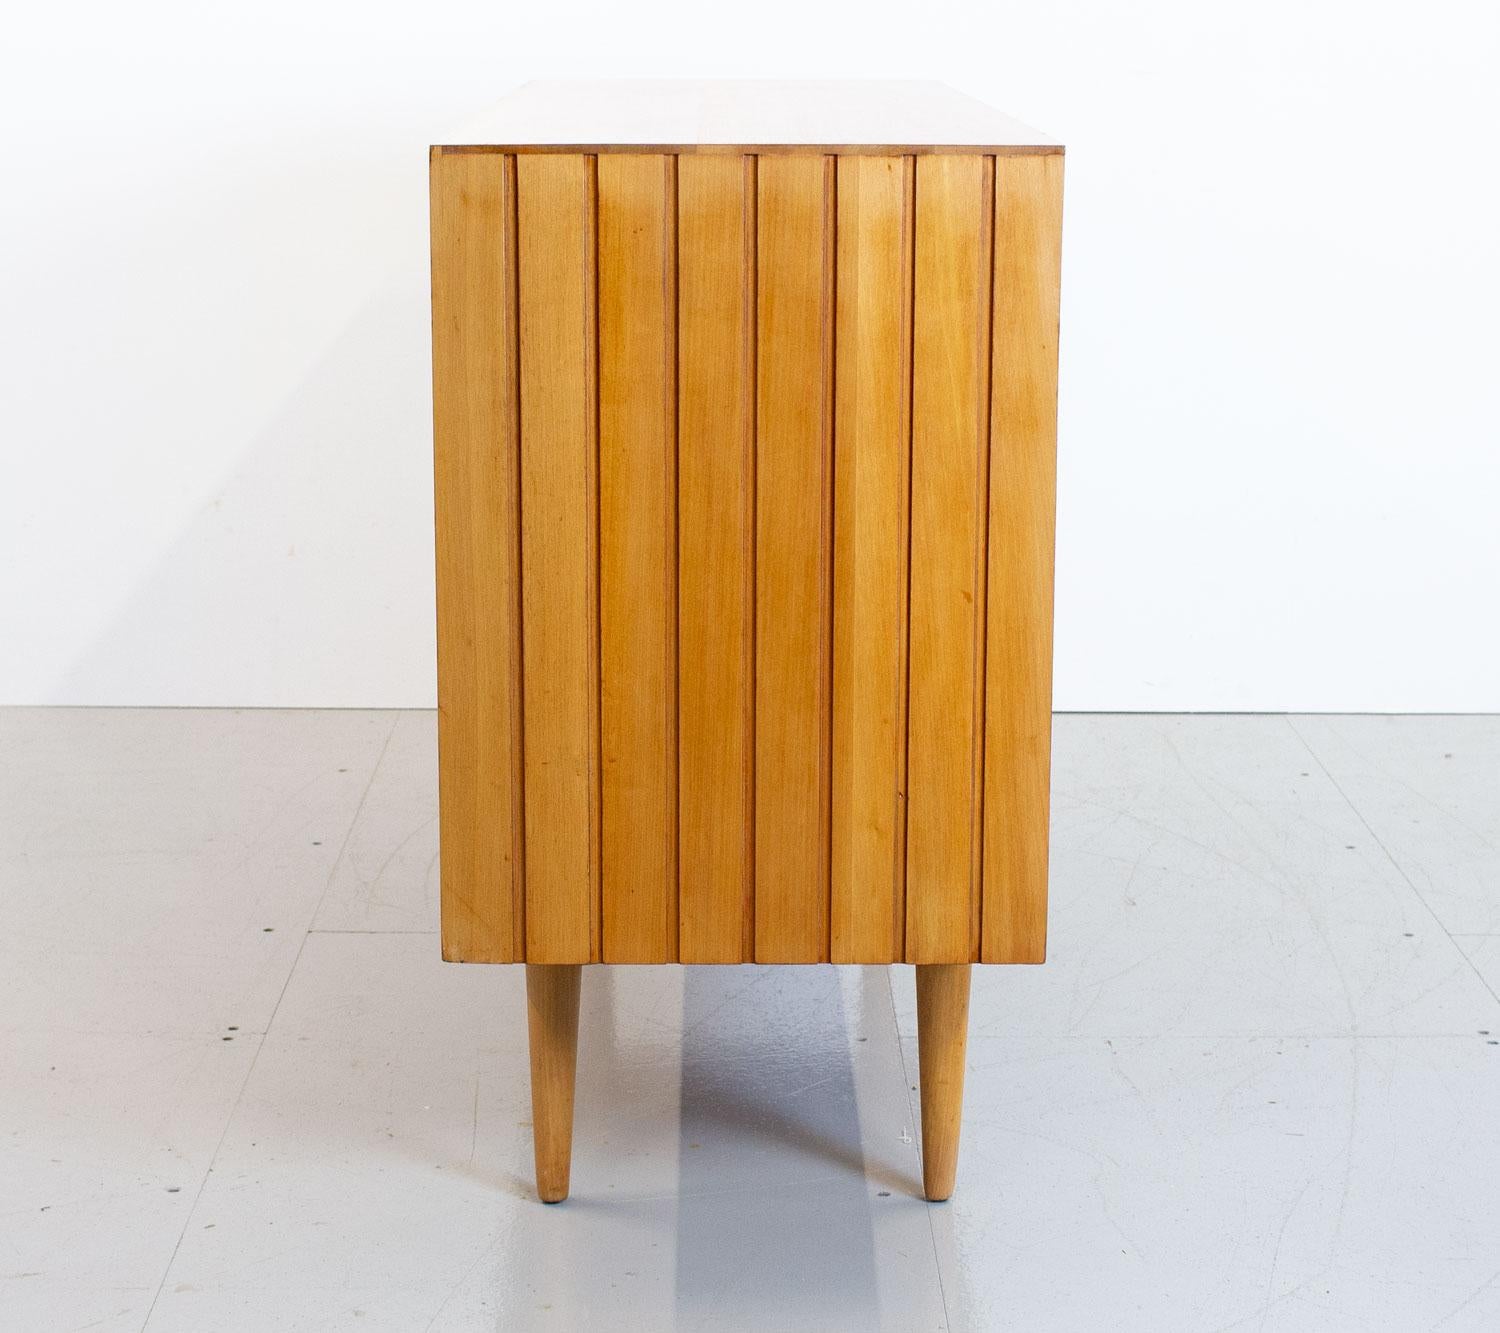 English Mid-Century Walnut Sideboard by Heals, 1960s For Sale 1